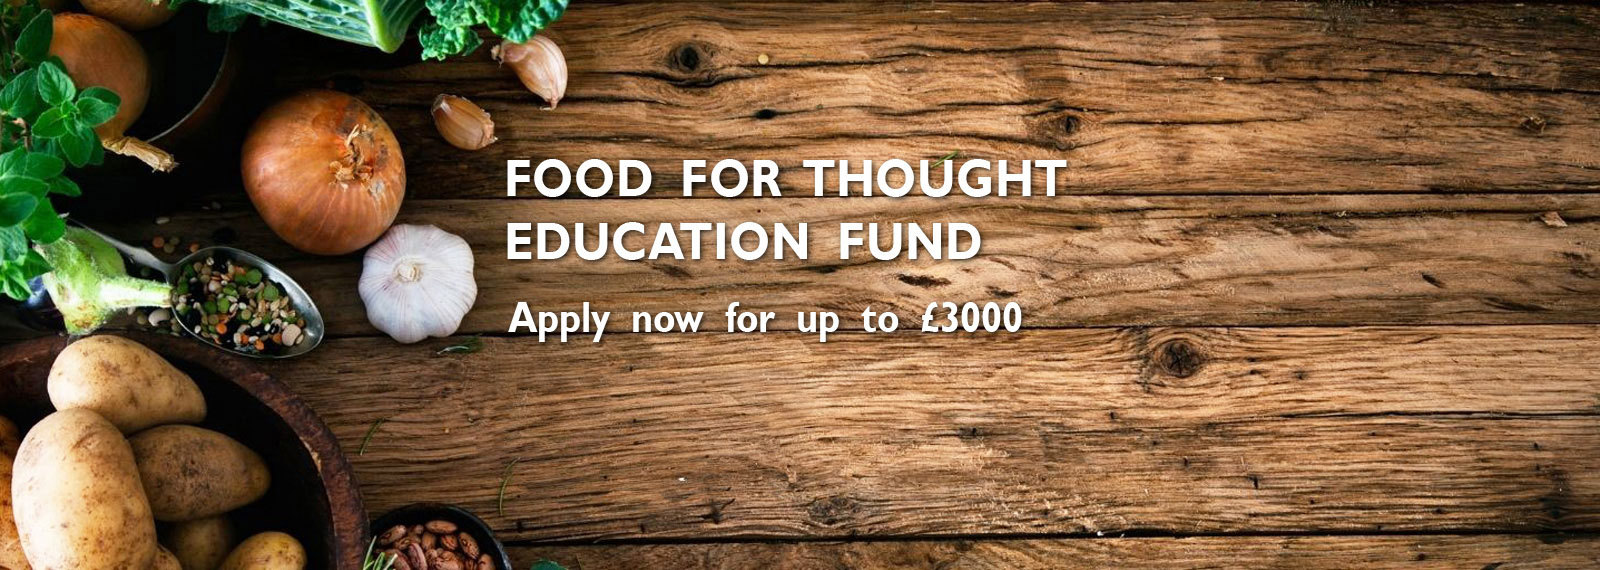 Banner for Food for Thought Education Fund 2022 - 2023